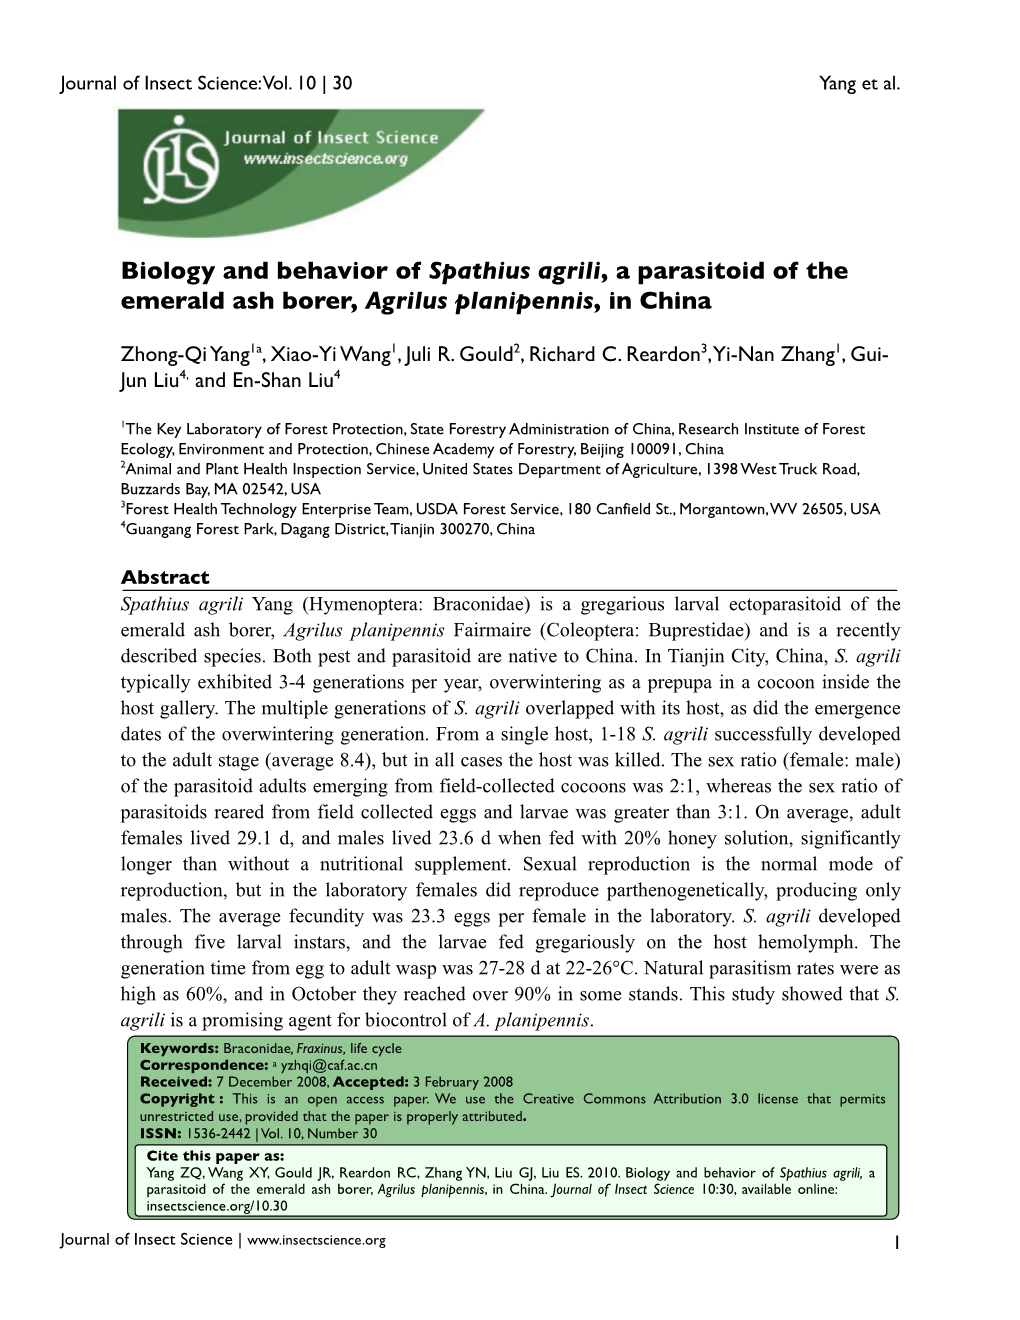 Biology and Behavior of Spathius Agrili, a Parasitoid of the Emerald Ash Borer, Agrilus Planipennis, in China